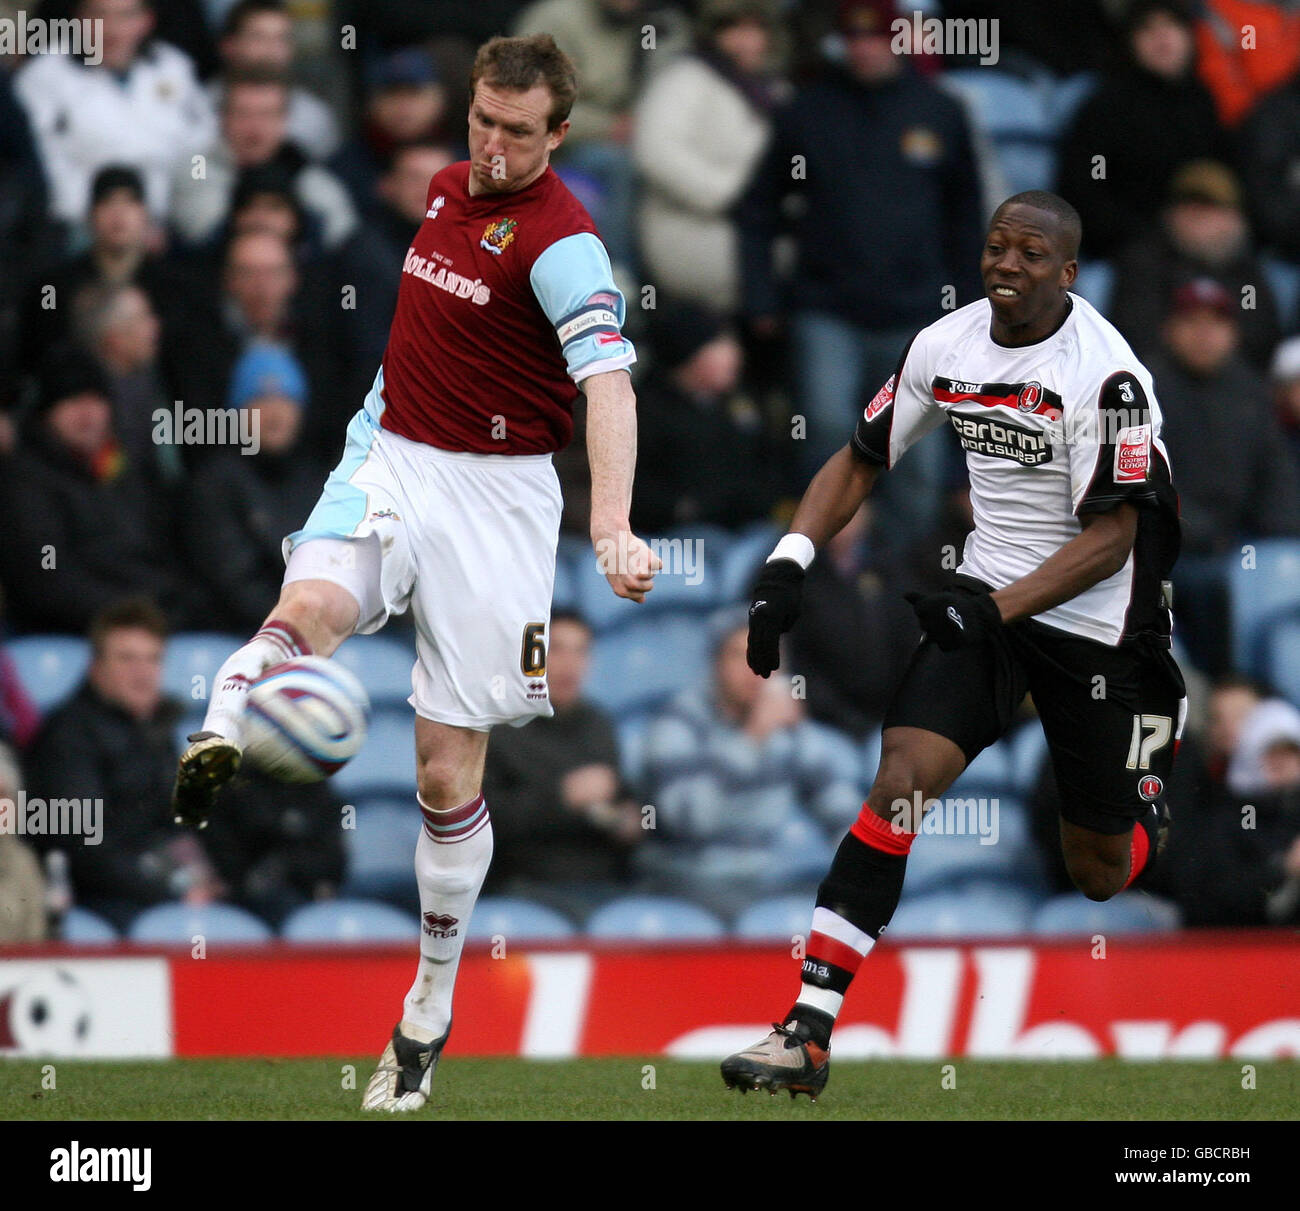 Burnley's Stephen Caldwell and Charlton Athletic's Chris Dickson during the Coca-Cola Championship match at Turf Moor, Burnley. Stock Photo